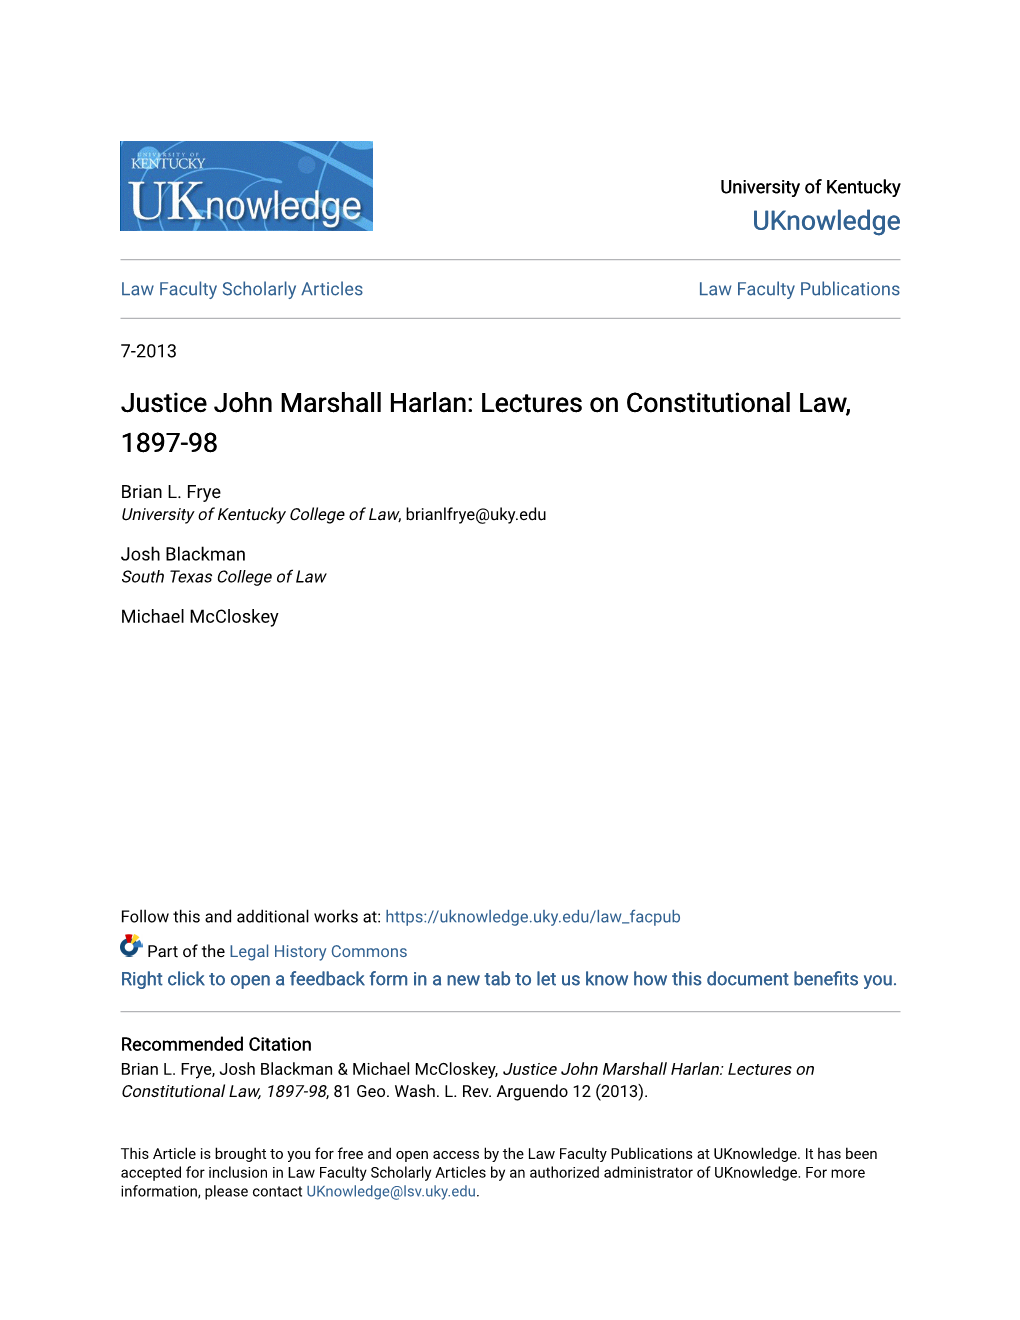 Justice John Marshall Harlan: Lectures on Constitutional Law, 1897-98